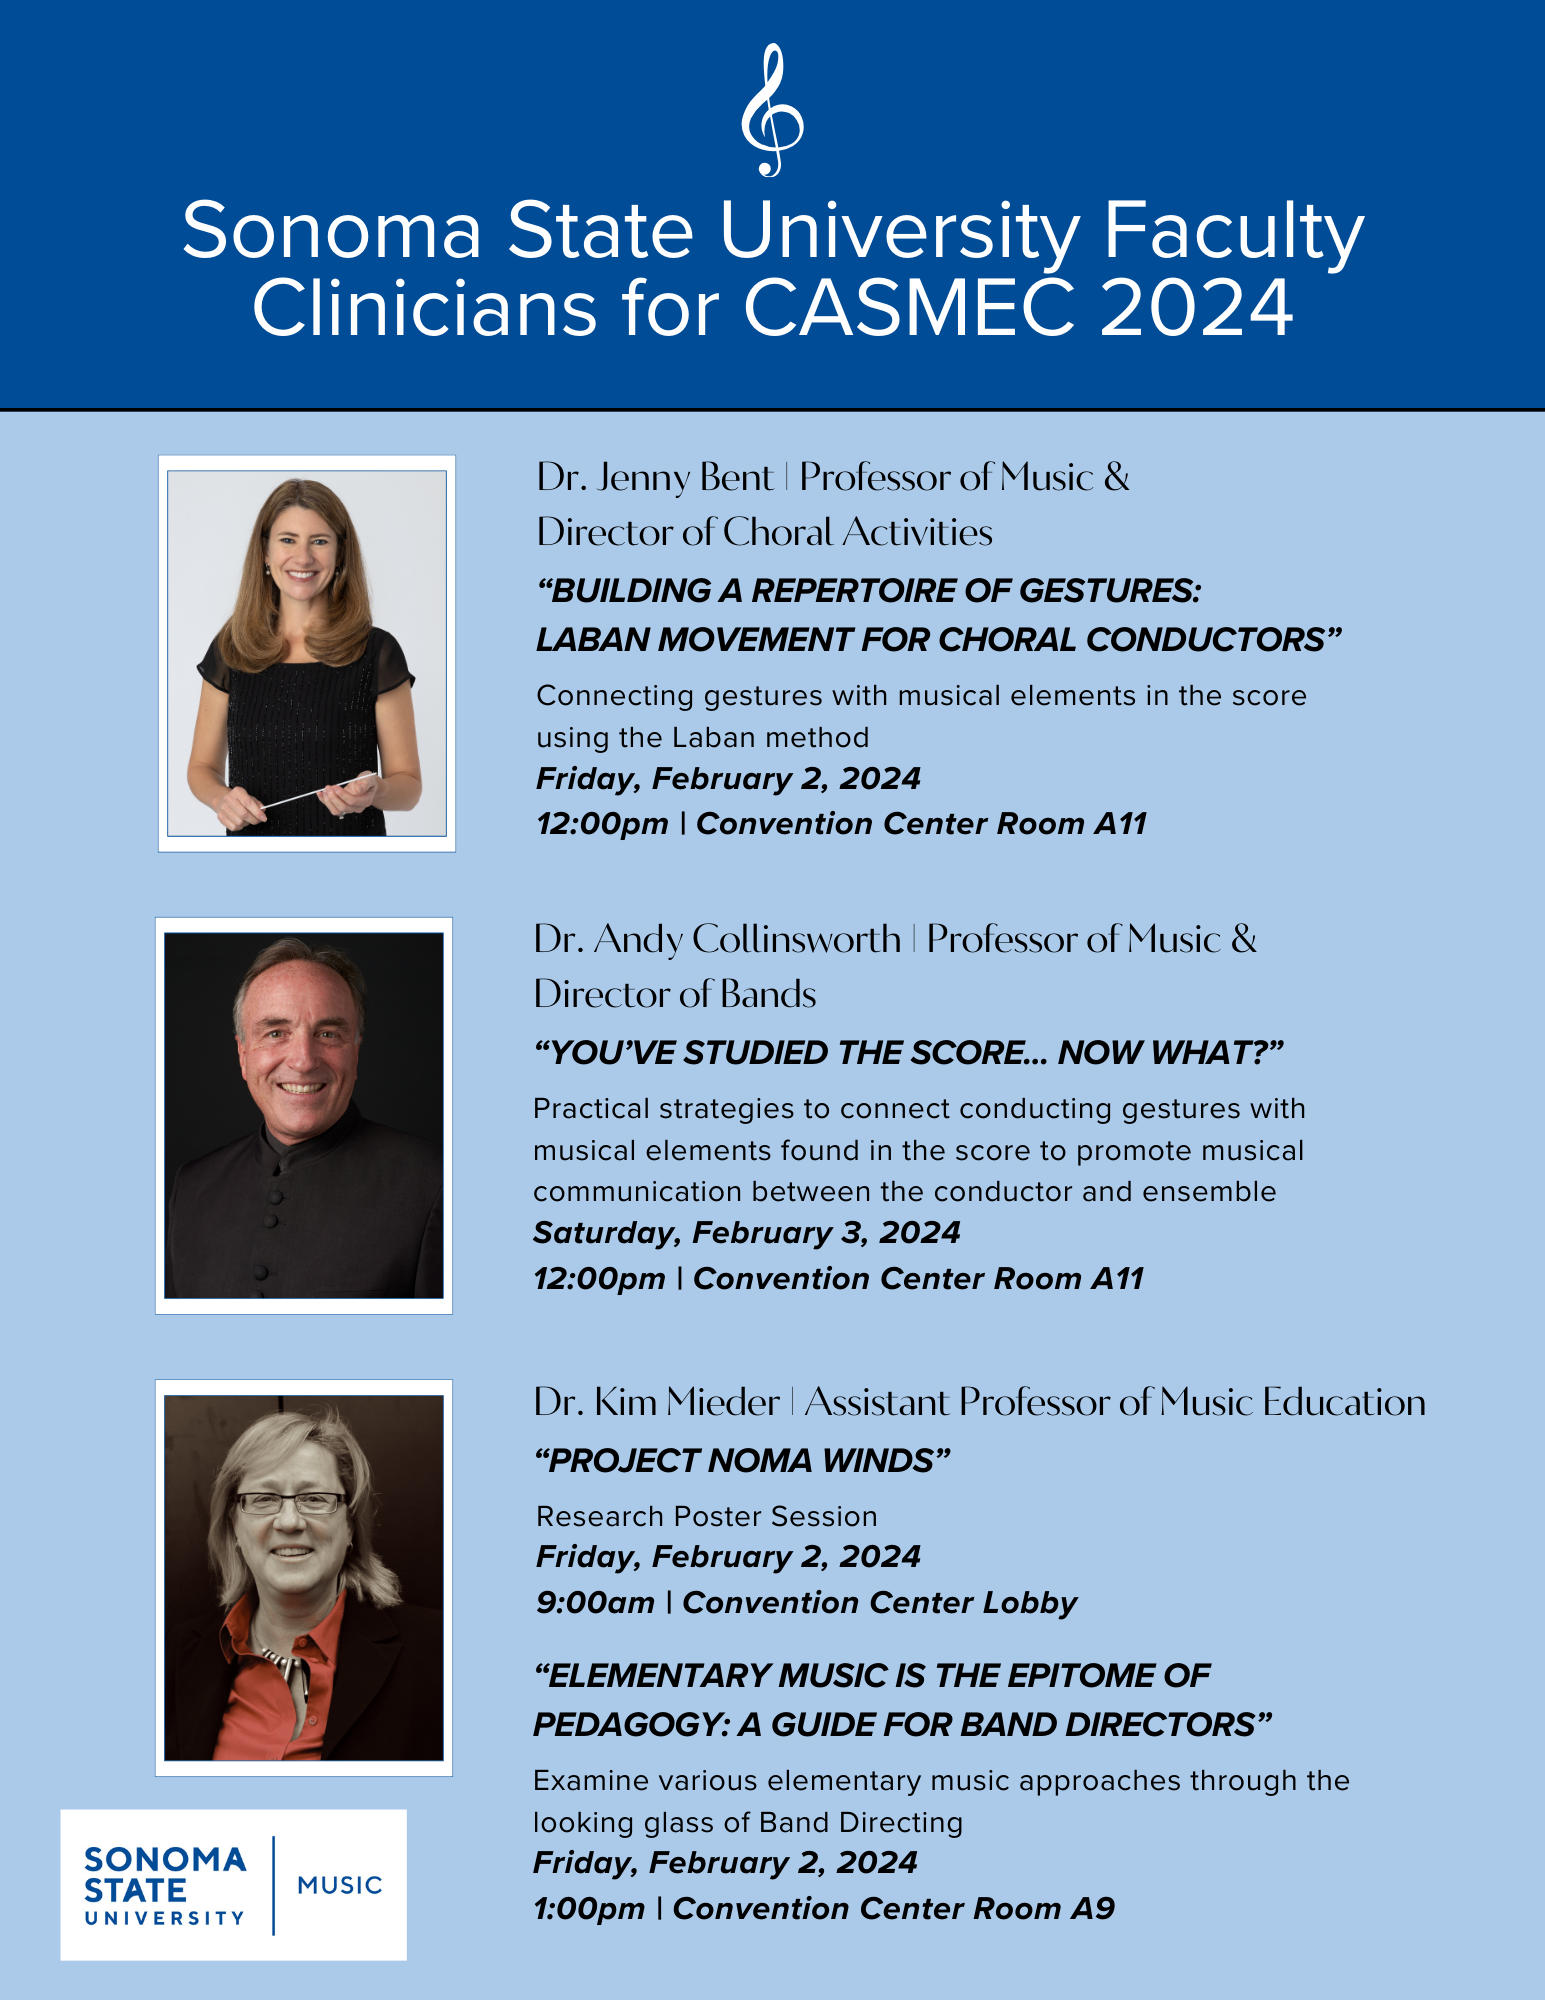 Sonoma State University Faculty Clinicians for CASMEC 2024 poster